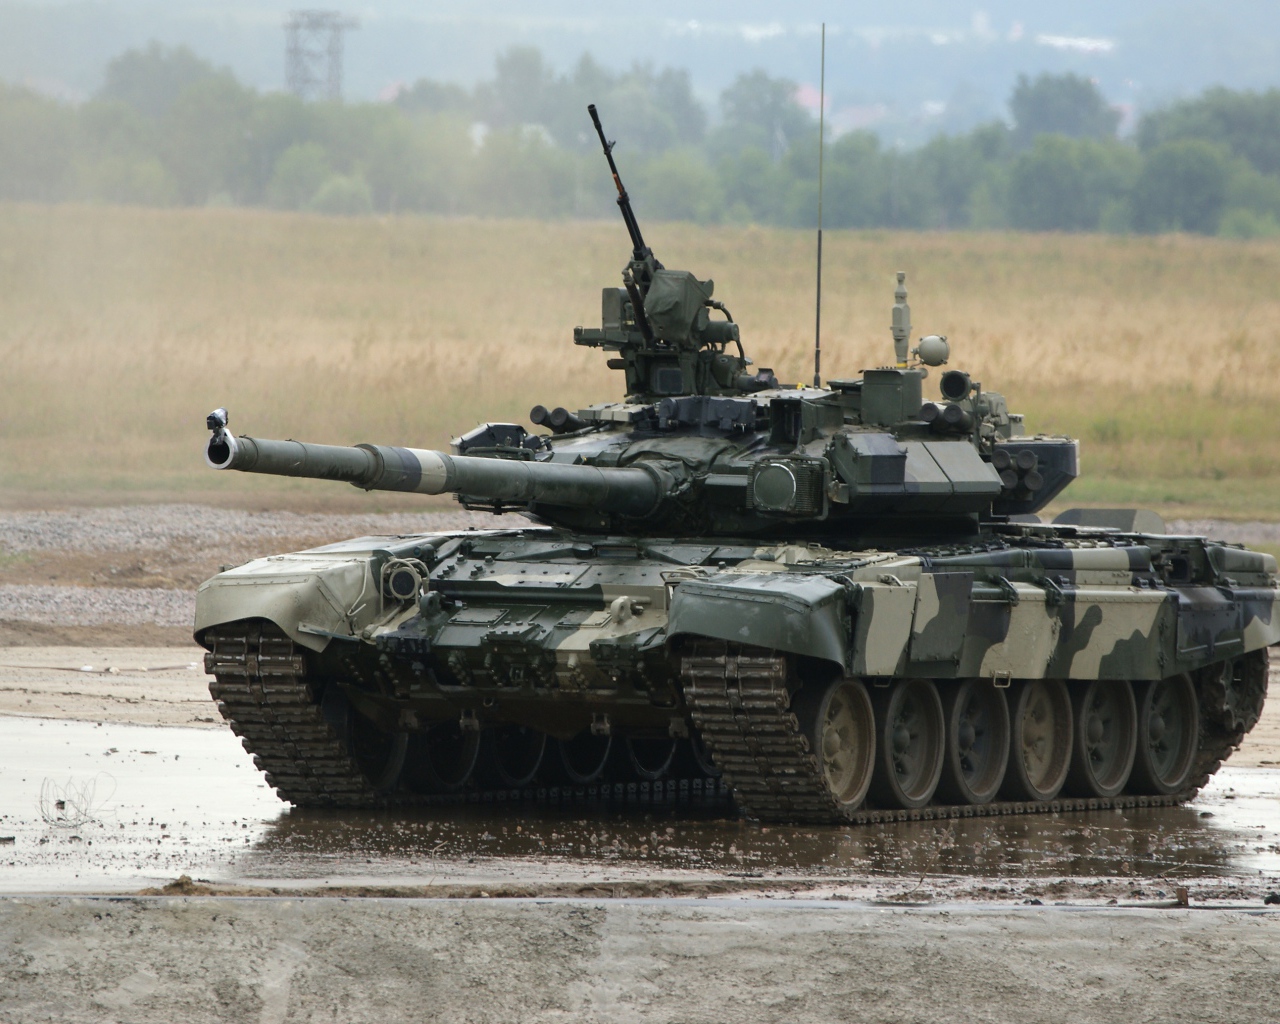 Tank T-90 in the mud